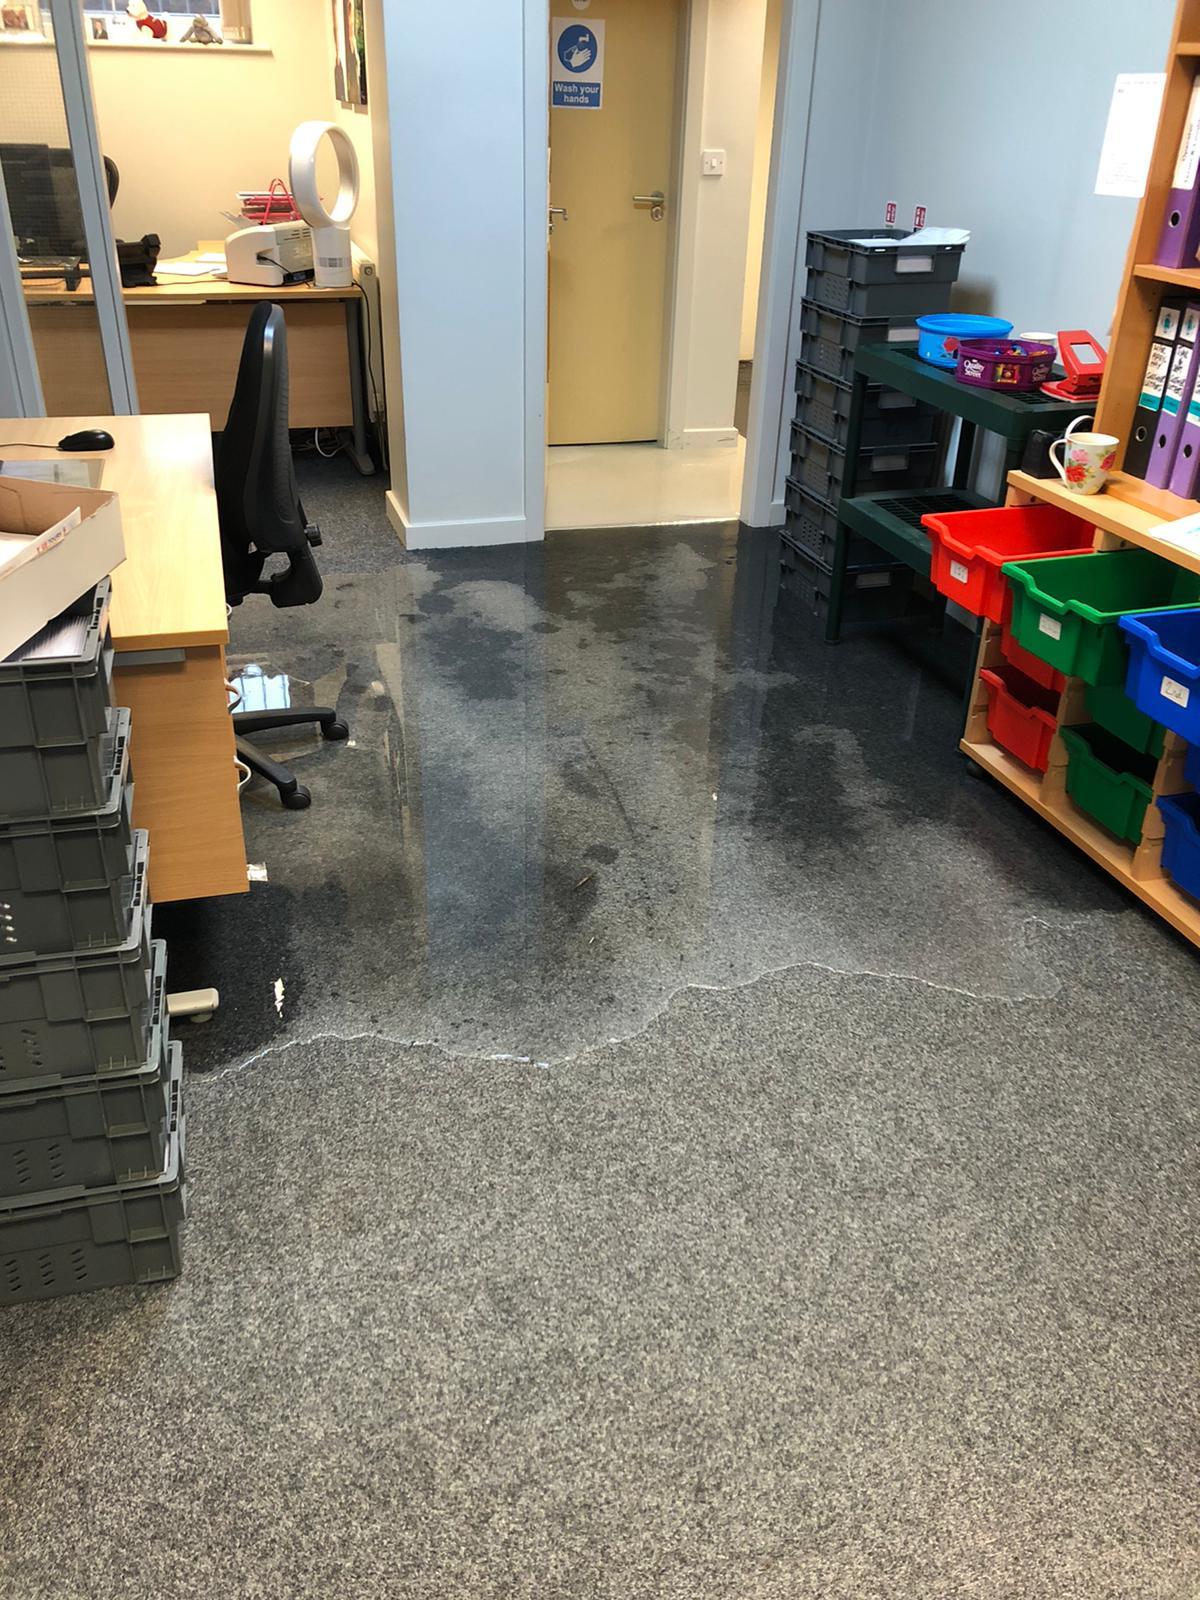 Water started to stream into the GB Tours office from the back door